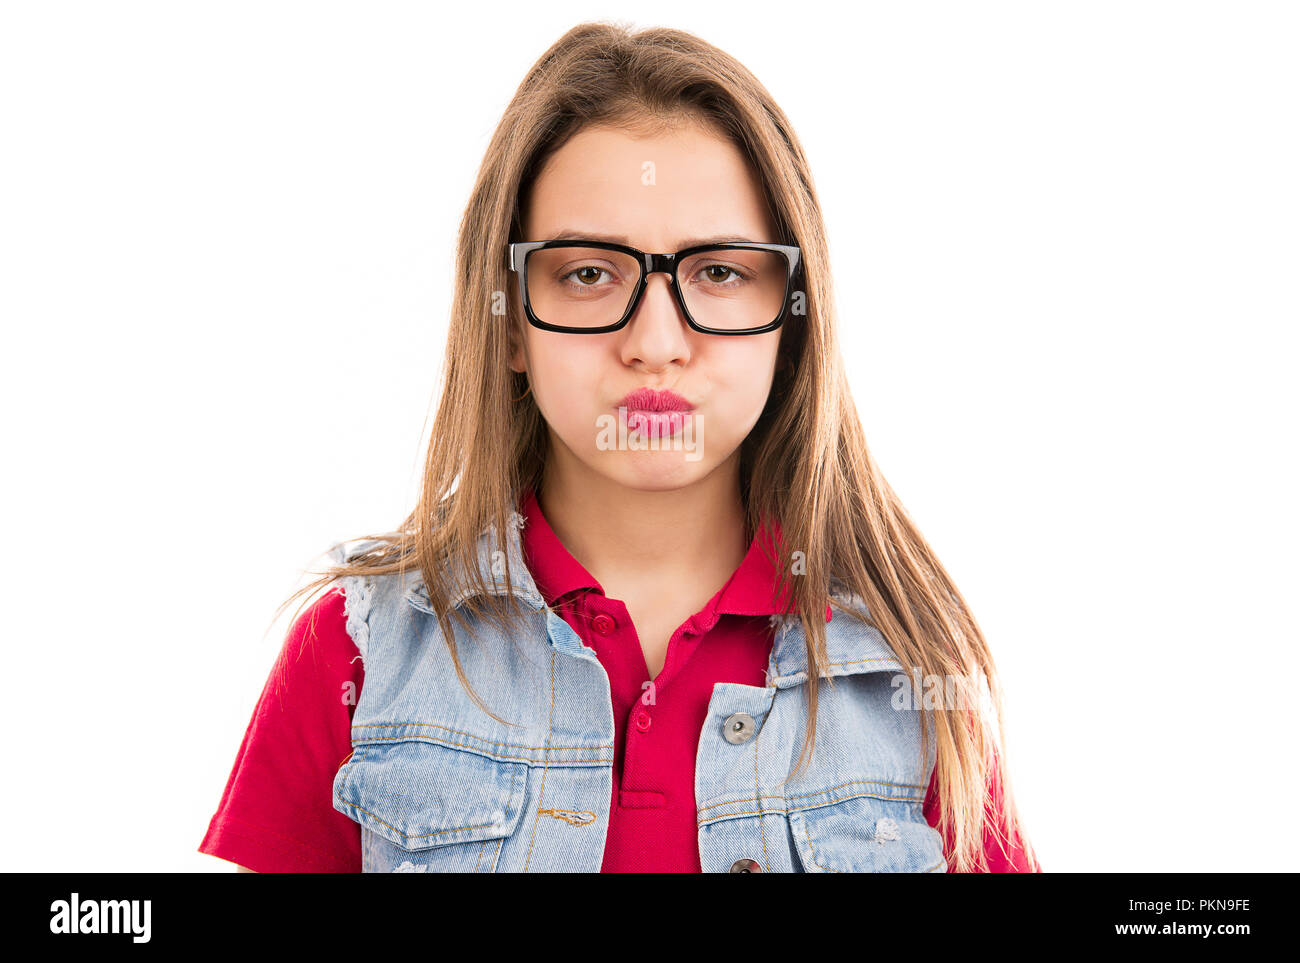 Young grumpy woman in glasses looking unhappy and puffing cheeks in disagreement isolated on white background Stock Photo